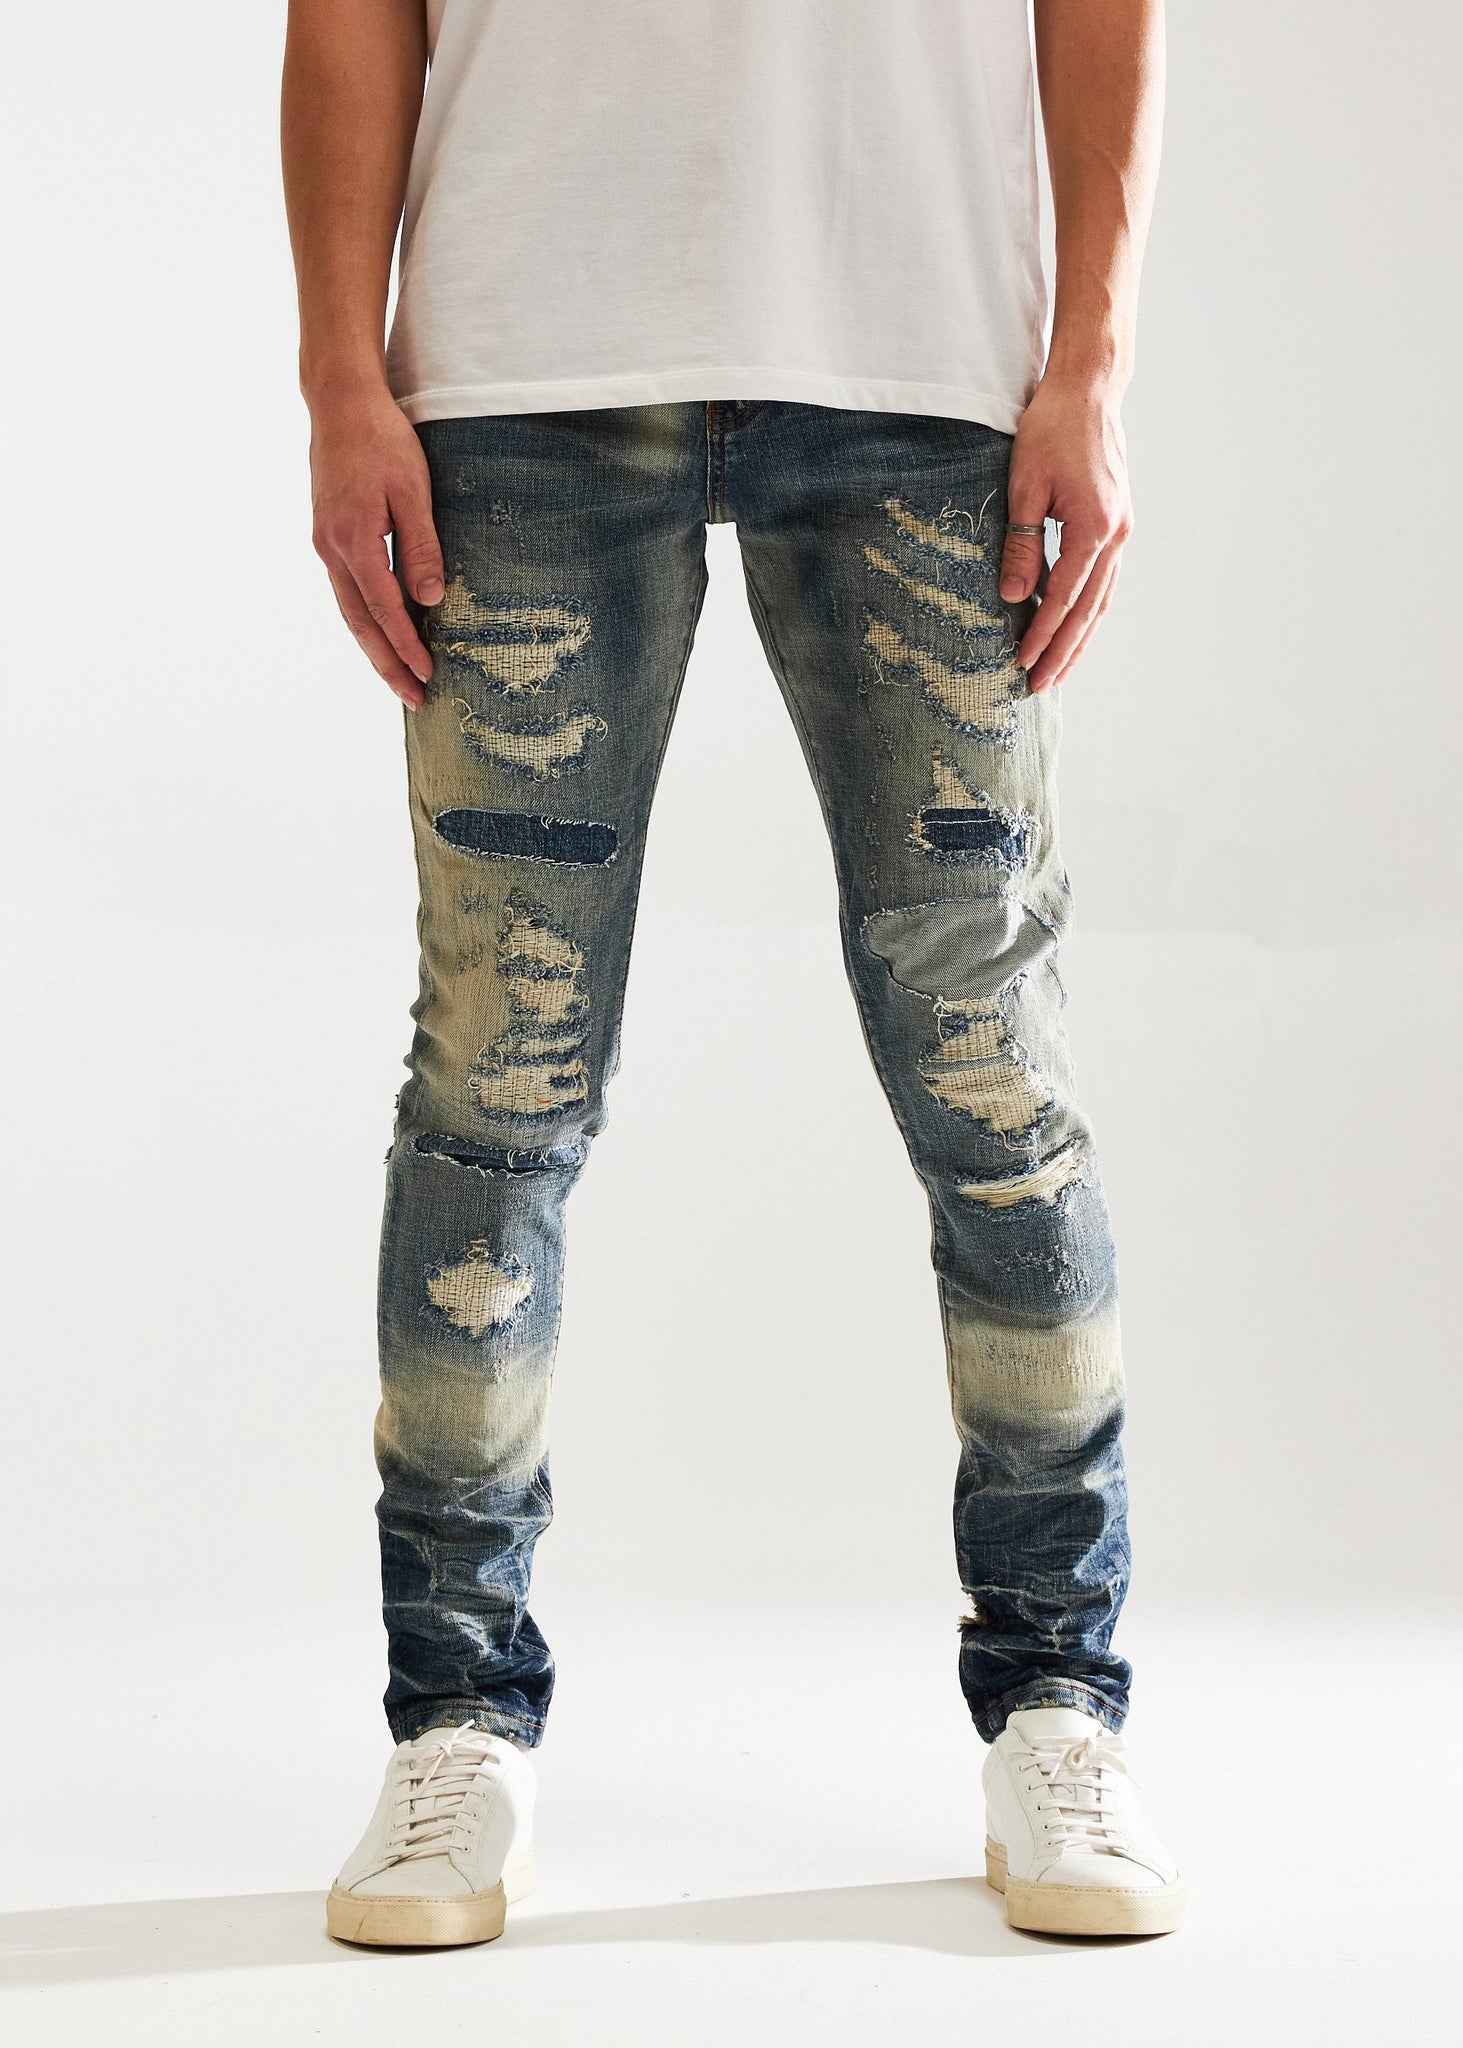 EMBELLISH DENIM - RIPPED AND PATCHED